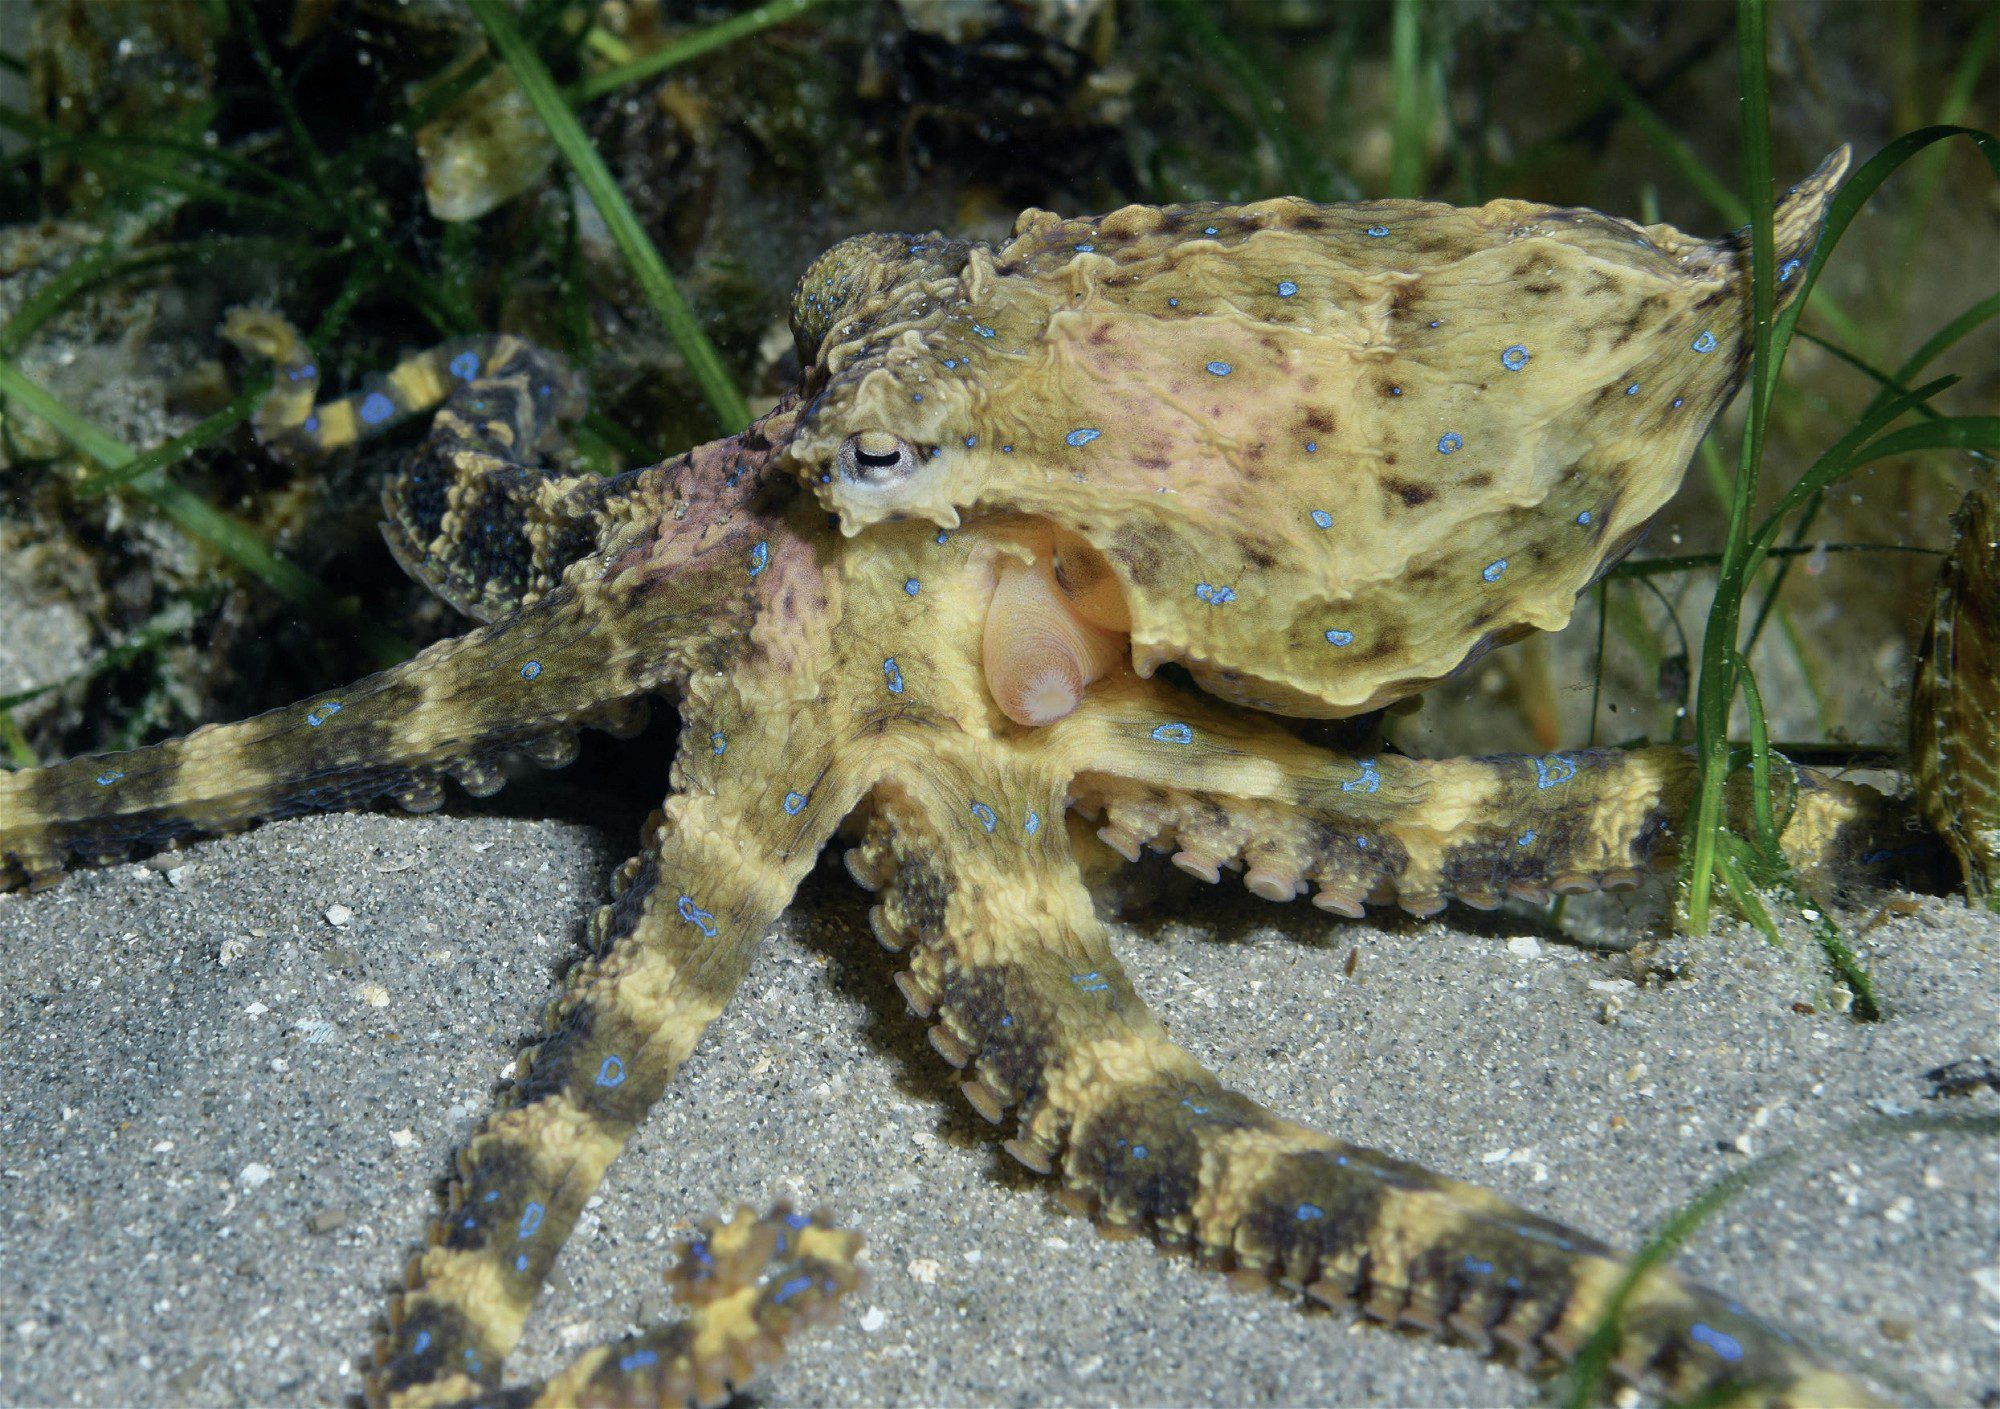 Blue-ringed octopus flashing its bright warning colors - YouTube